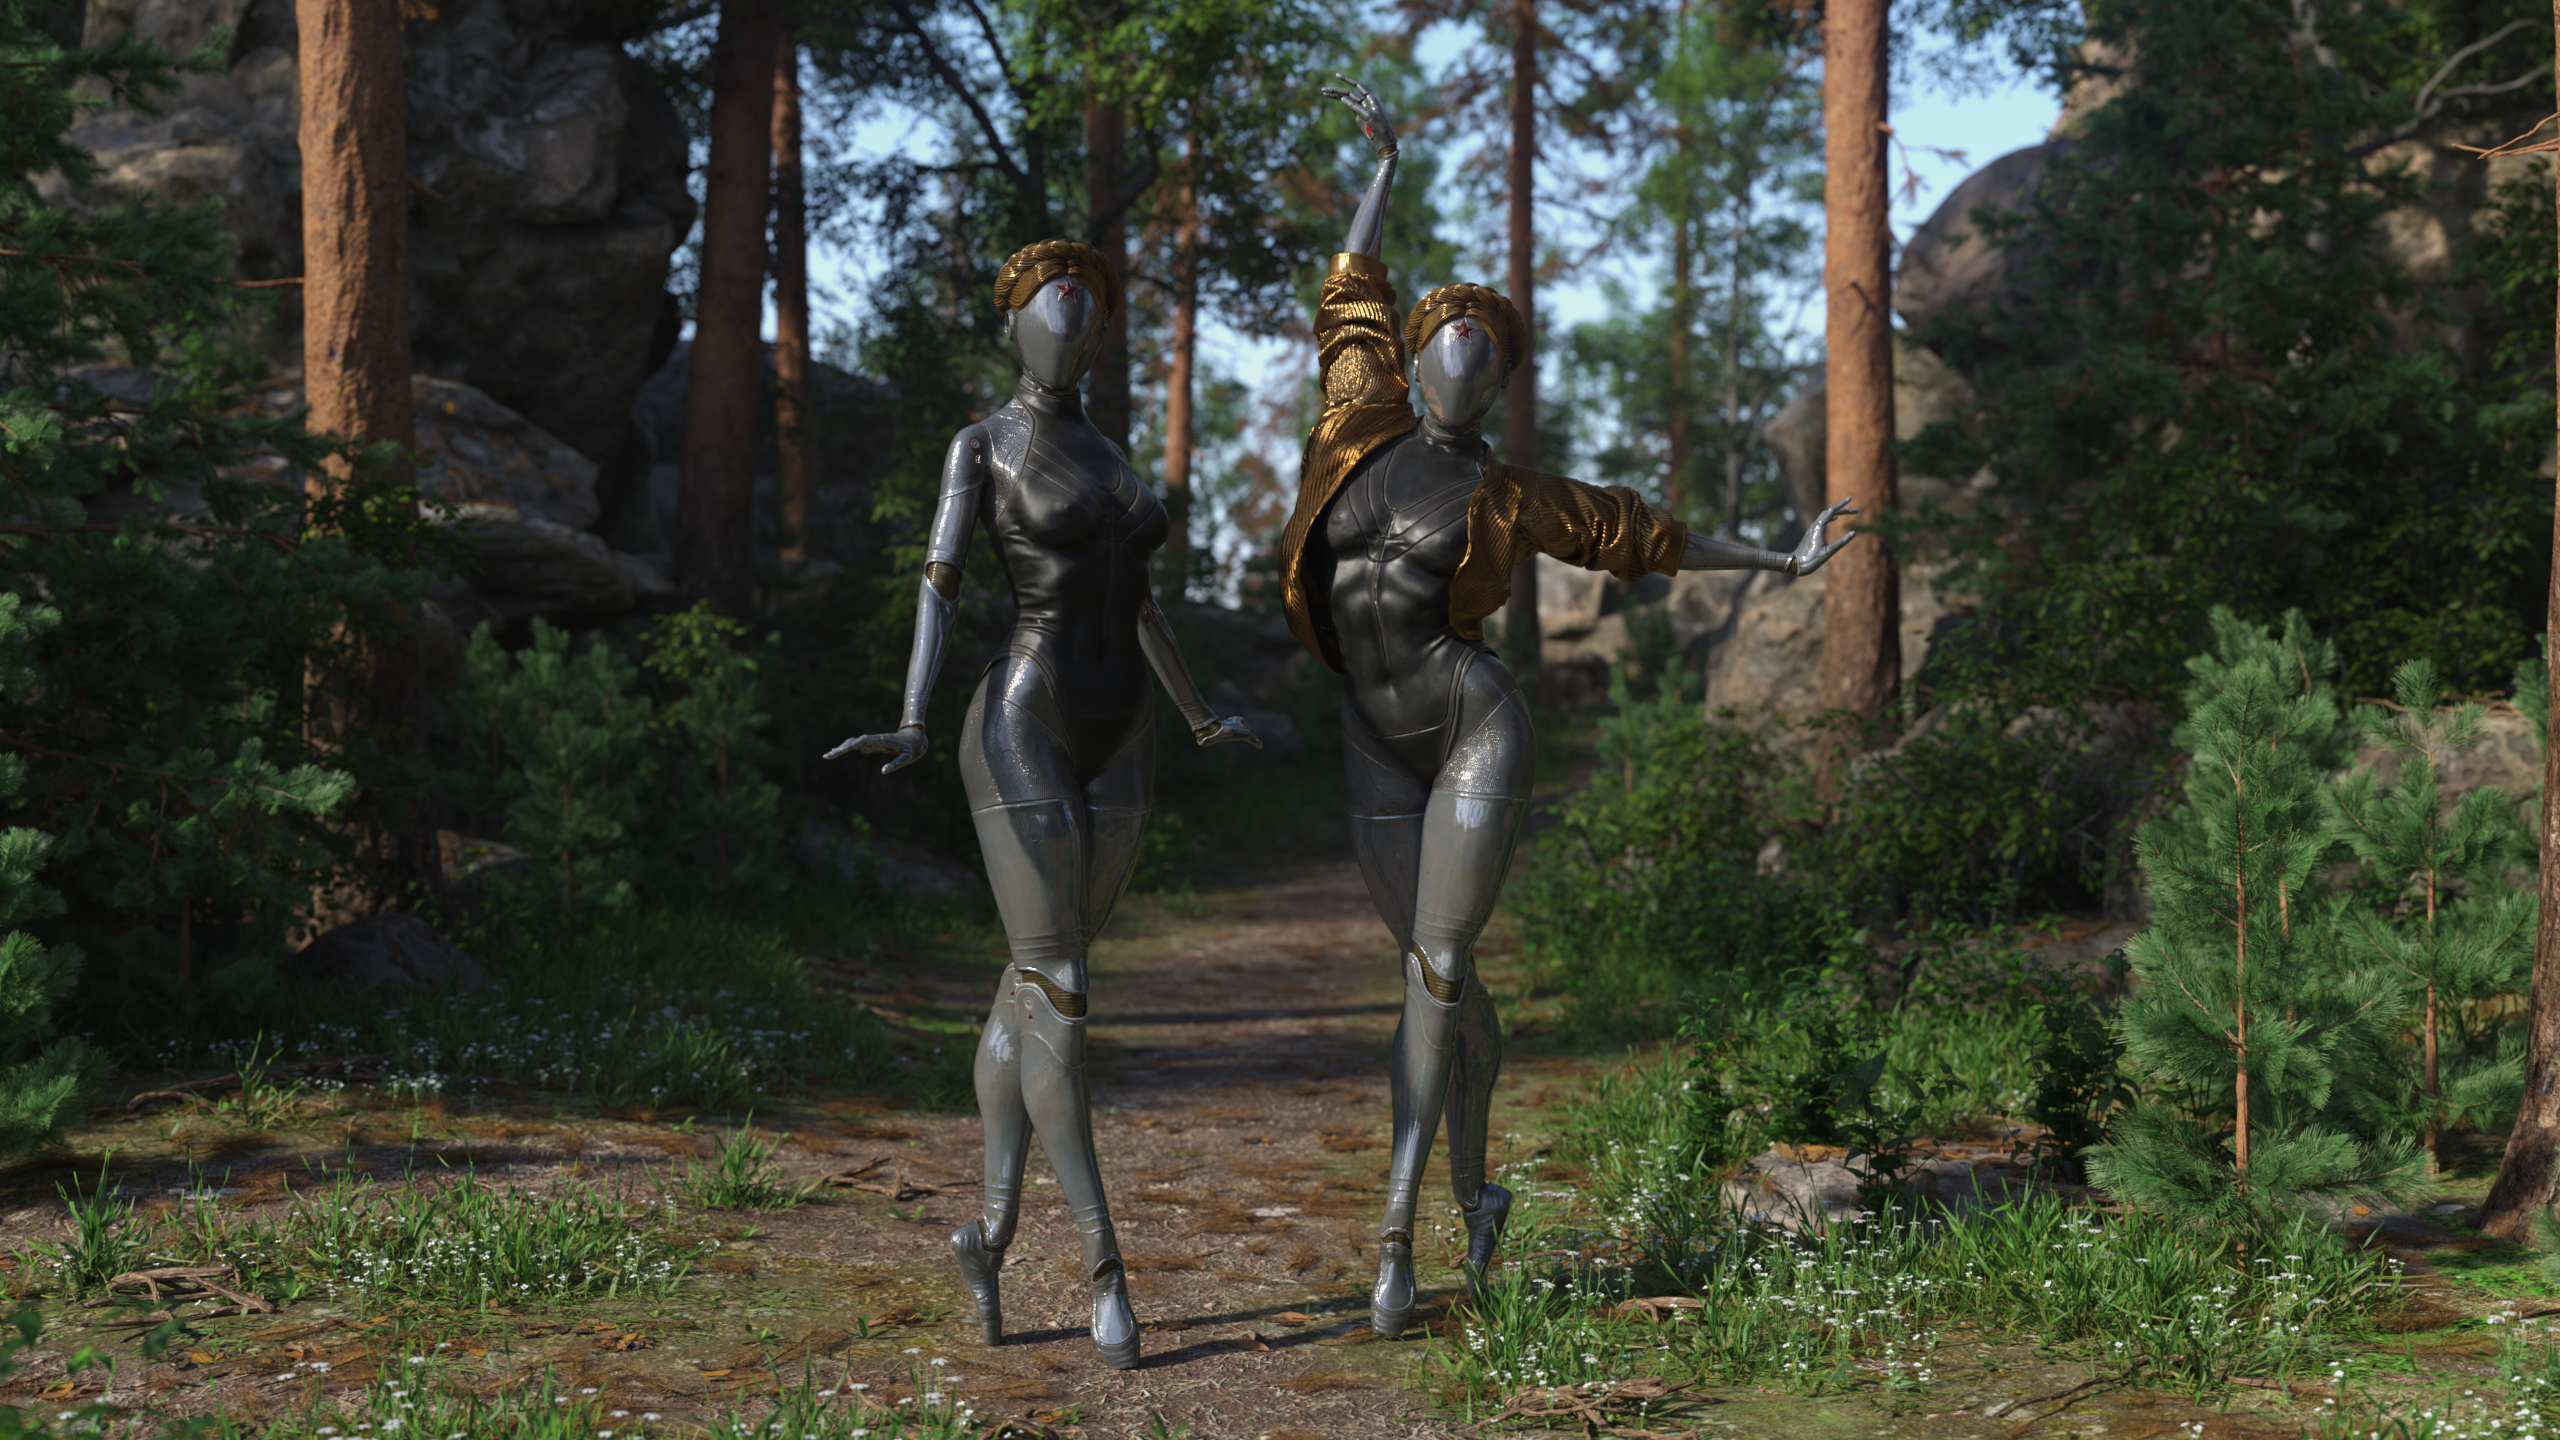 Atomic Heart Daz 3D CGi Video Games The Twins Atomic Heart Video Game Characters Path Forest Trees 2560x1440